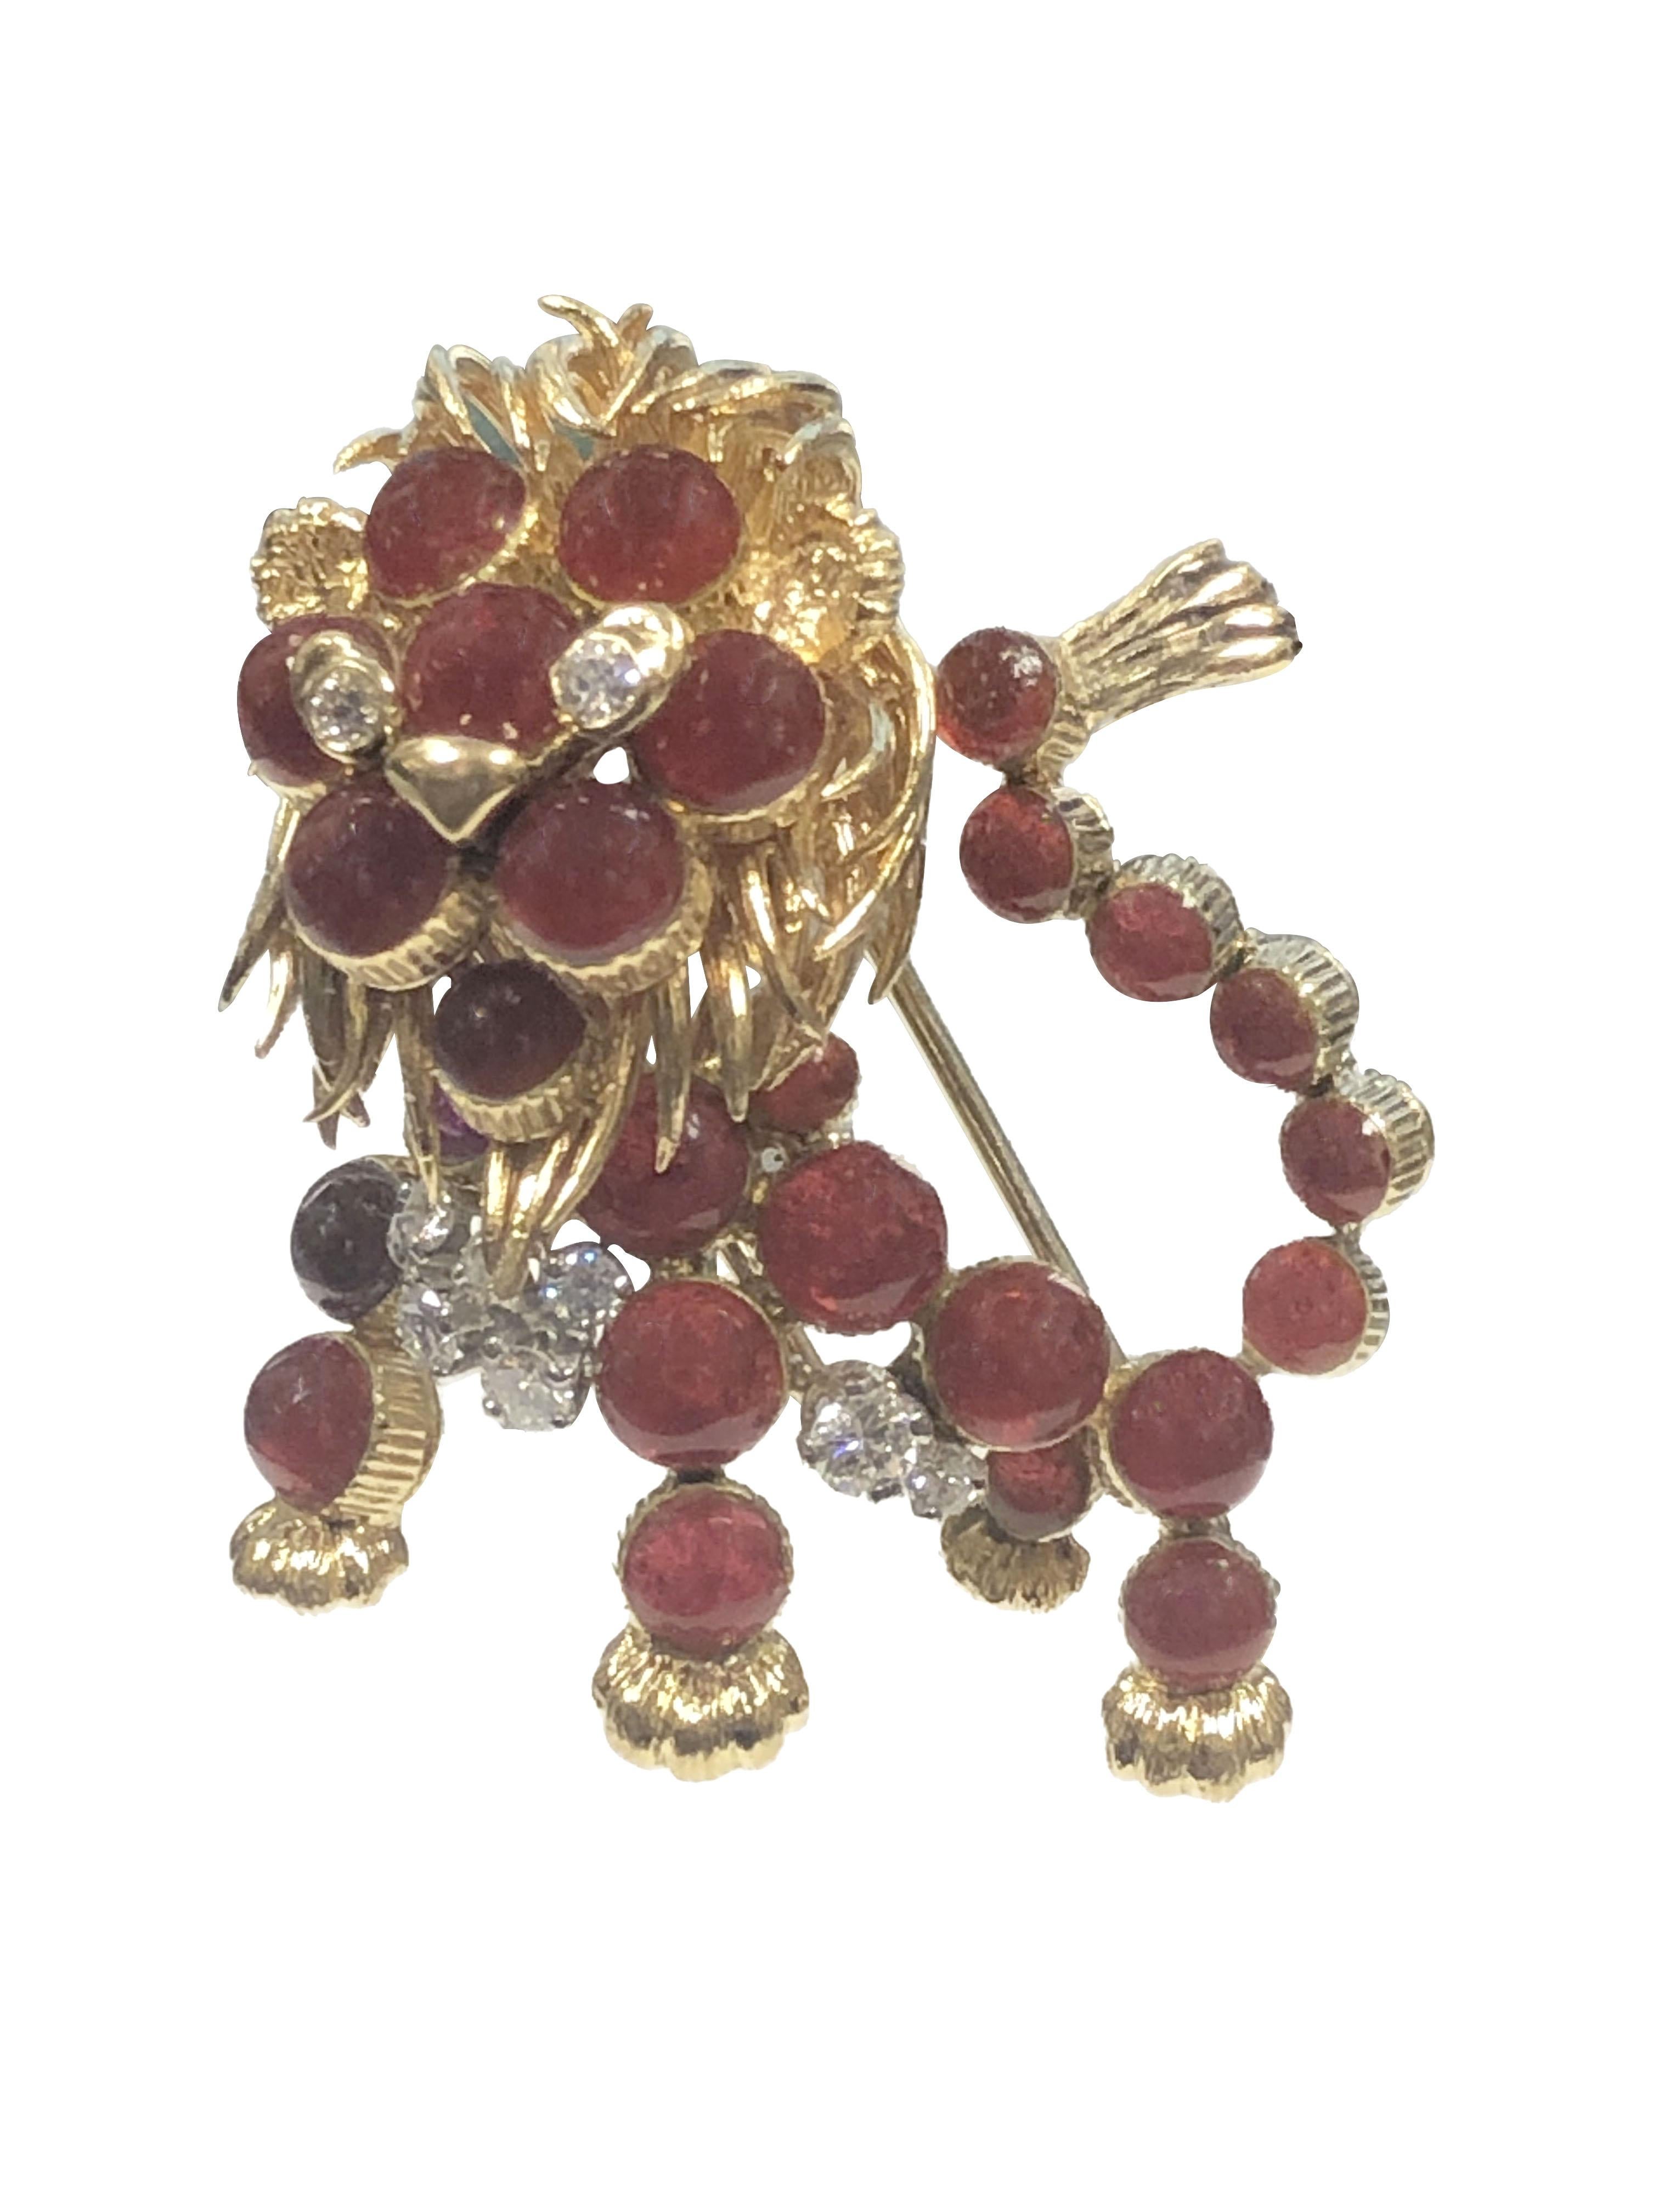 Circa 1960s Cartier France 18K yellow Gold Whimsical Lion Brooch, Measuring 1 3/8 inches X 1 3/4 inches. Hand Chased and detailed Gold work and set with Round Cabochon Red Glass stones and Further set with Diamonds. Having a Double pin Clip